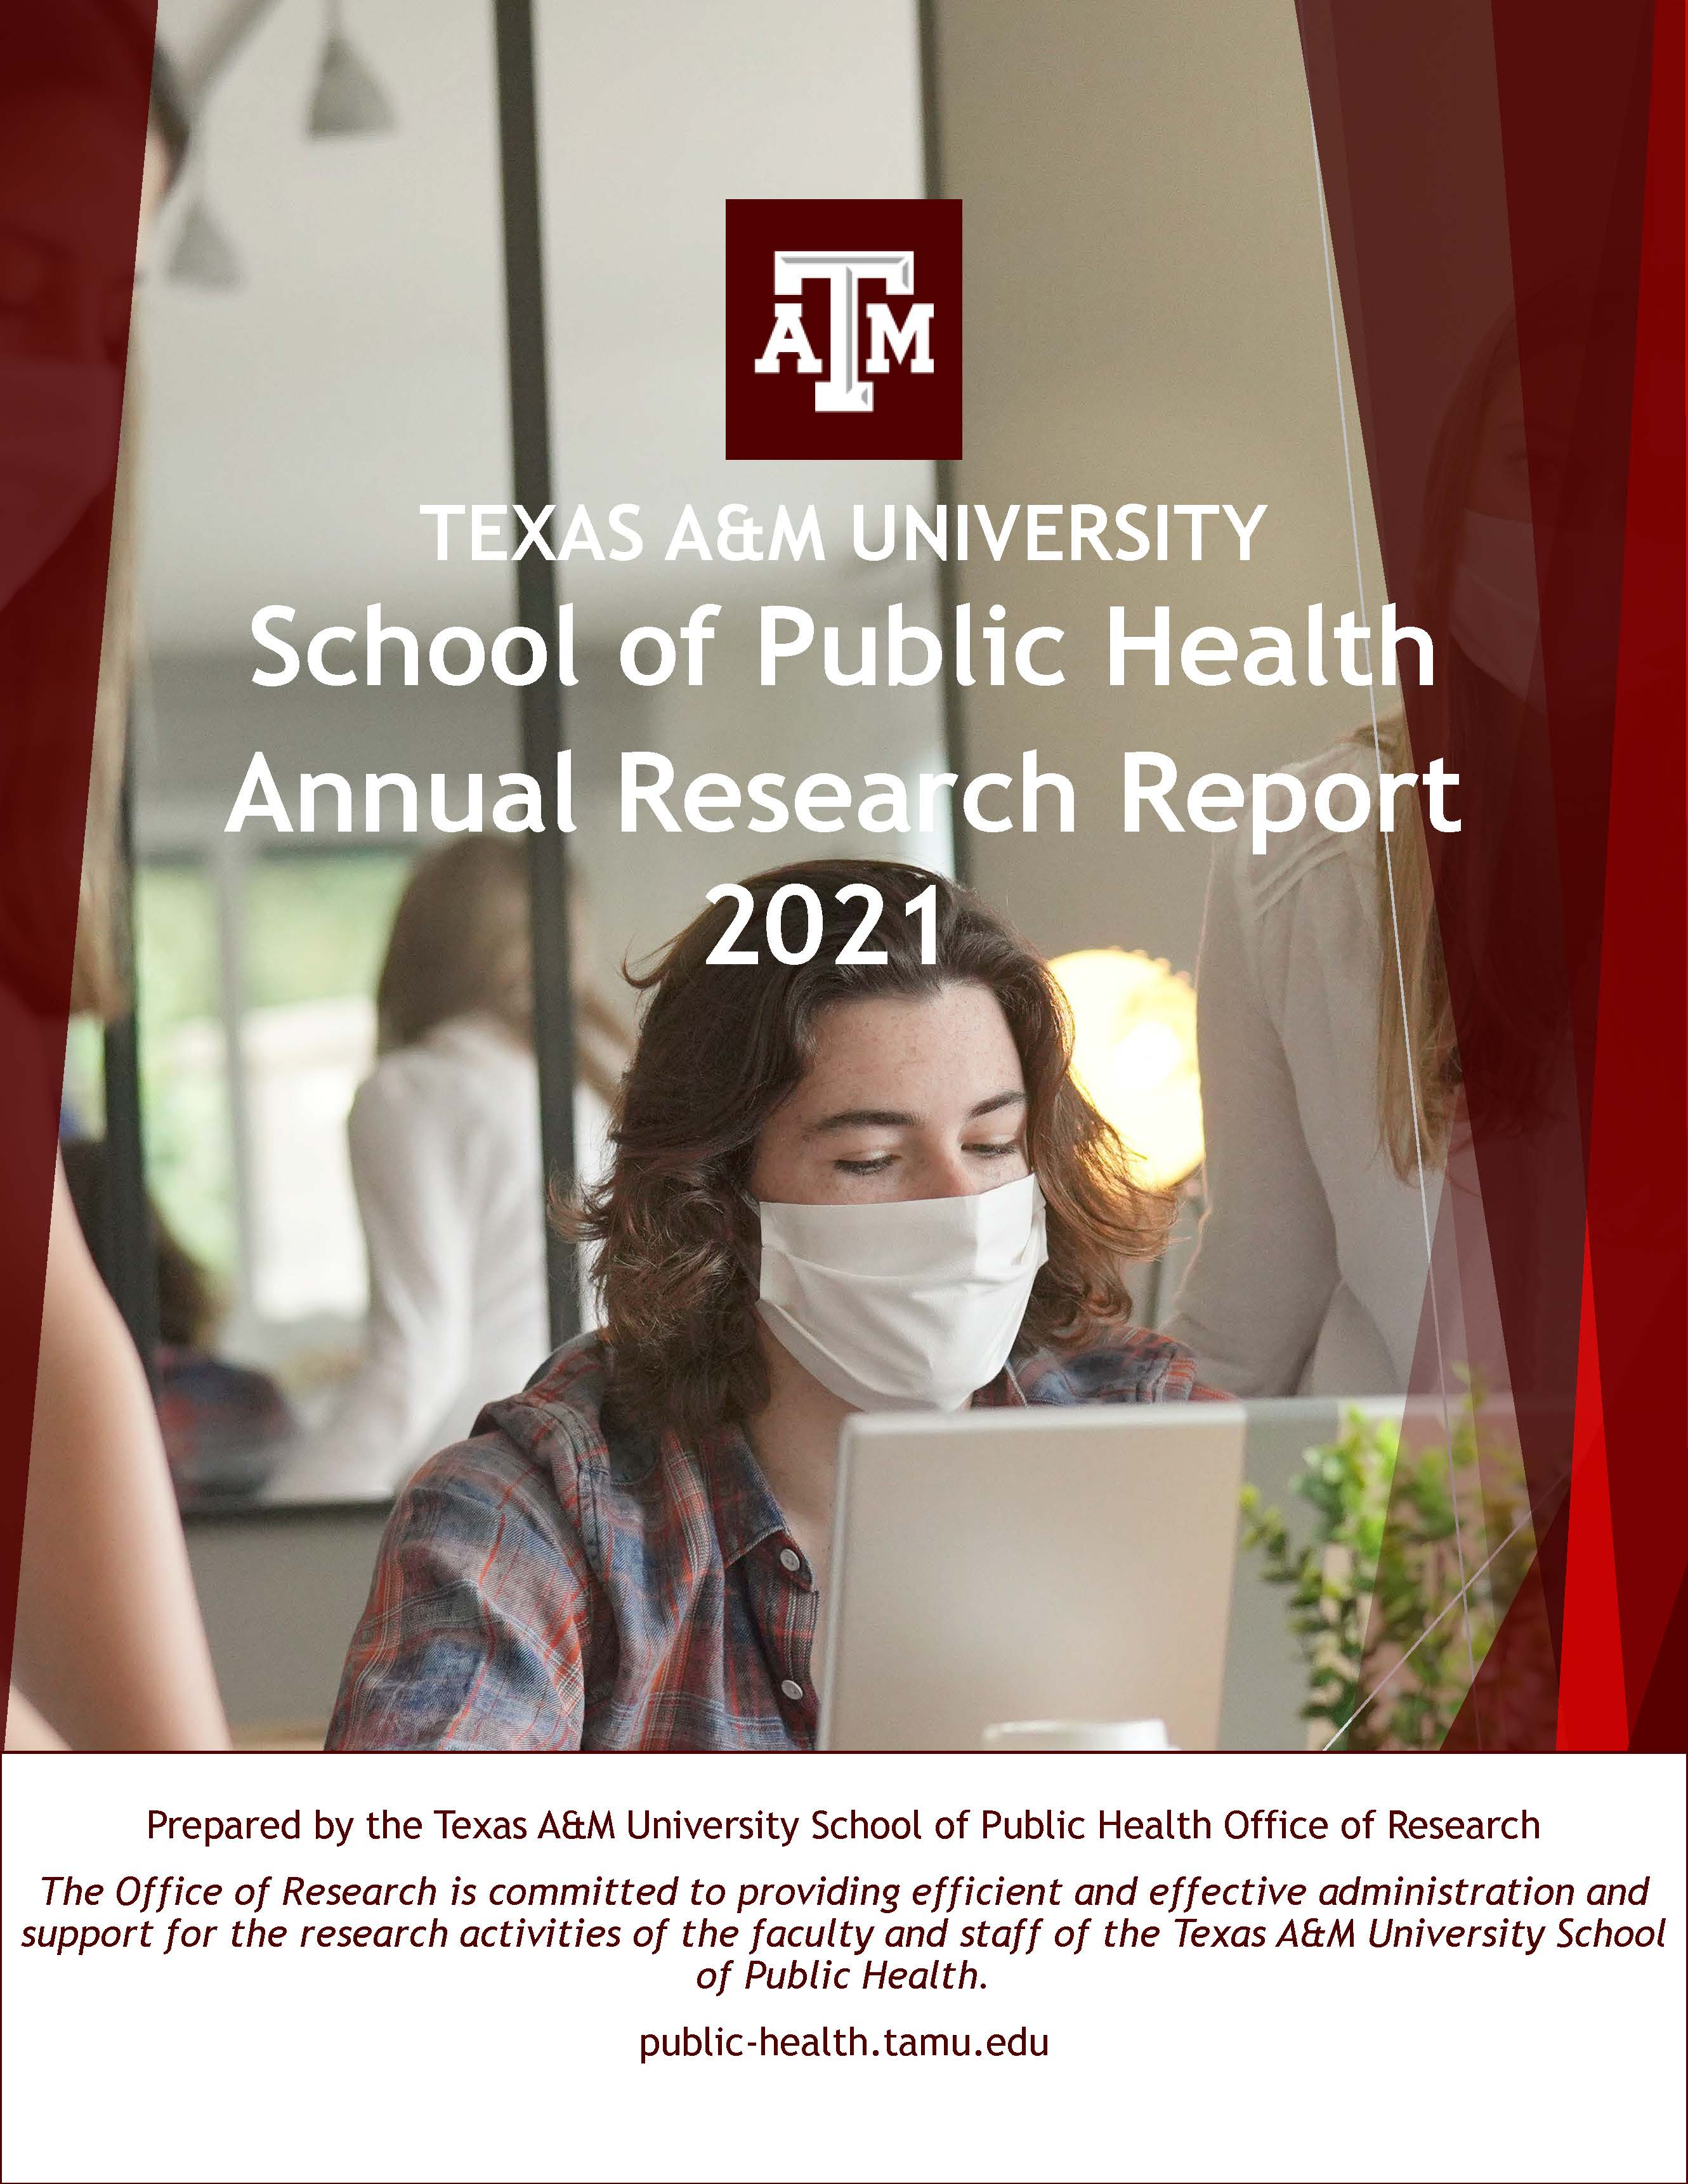 SPH FY 2021 Annual Research Report